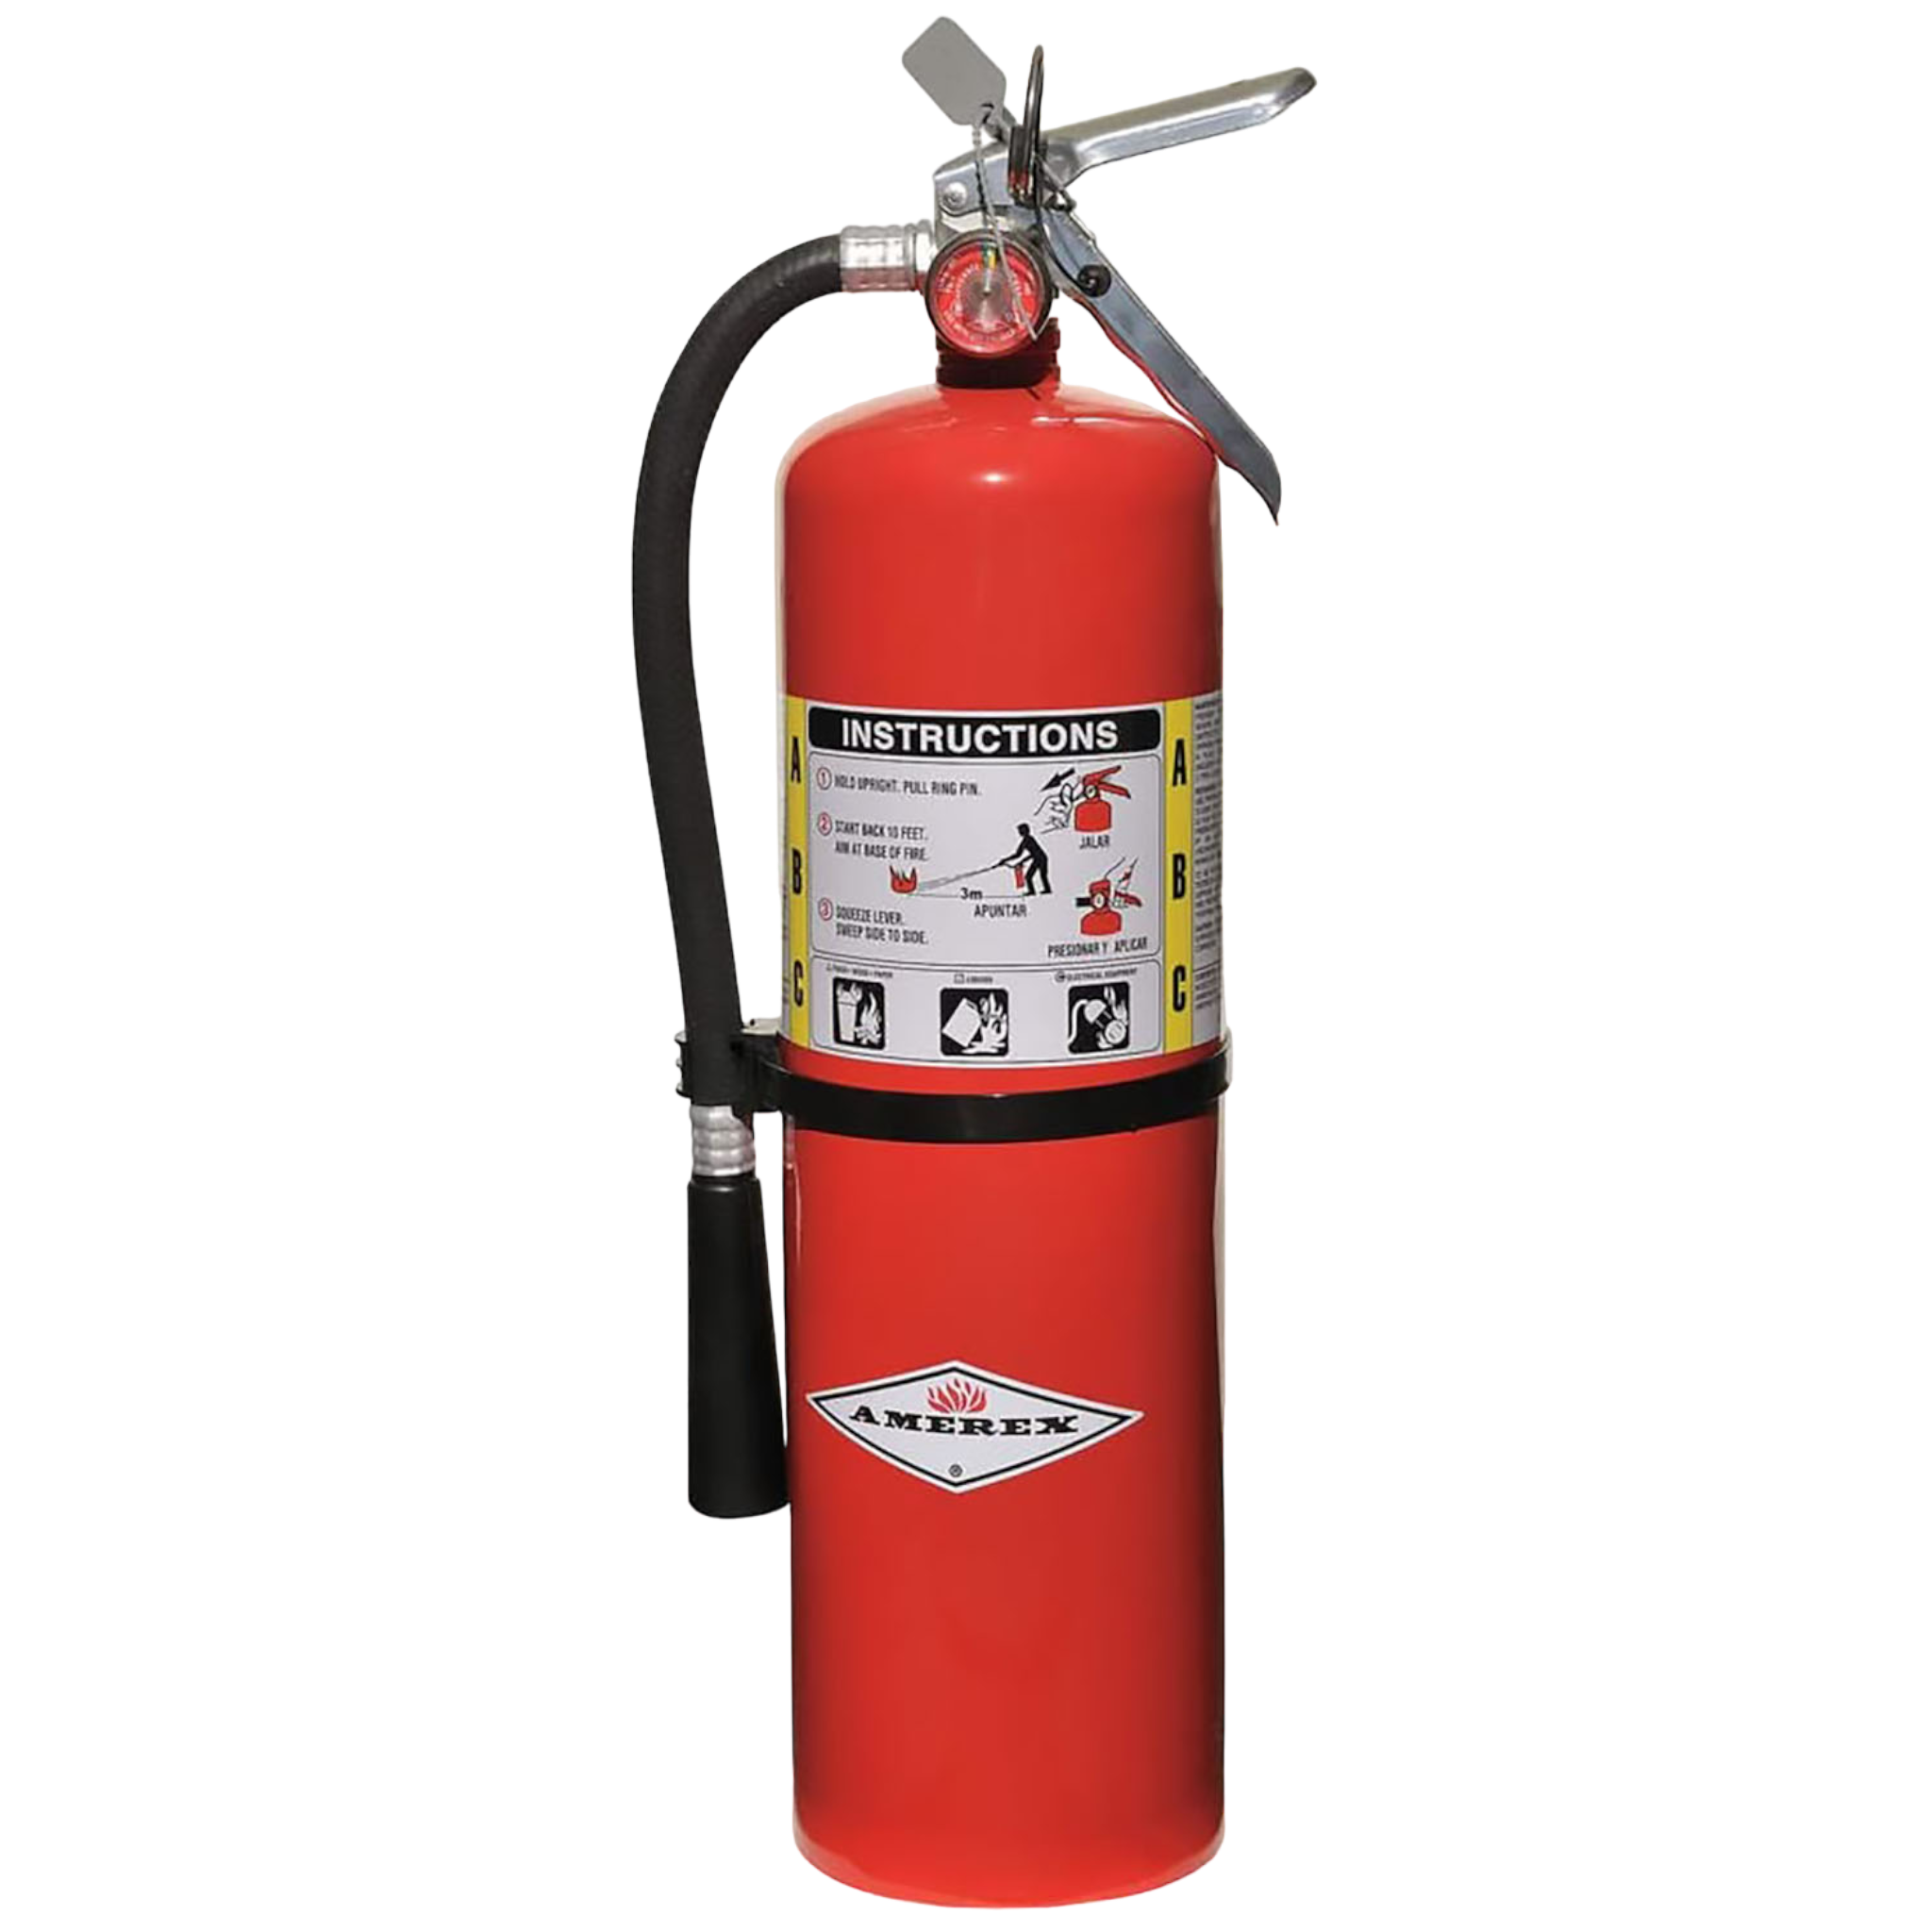 Amerex B456 ABC Dry Chemical Fire Extinguisher with Aluminum Valve, 10 lb - Pro-Distributing